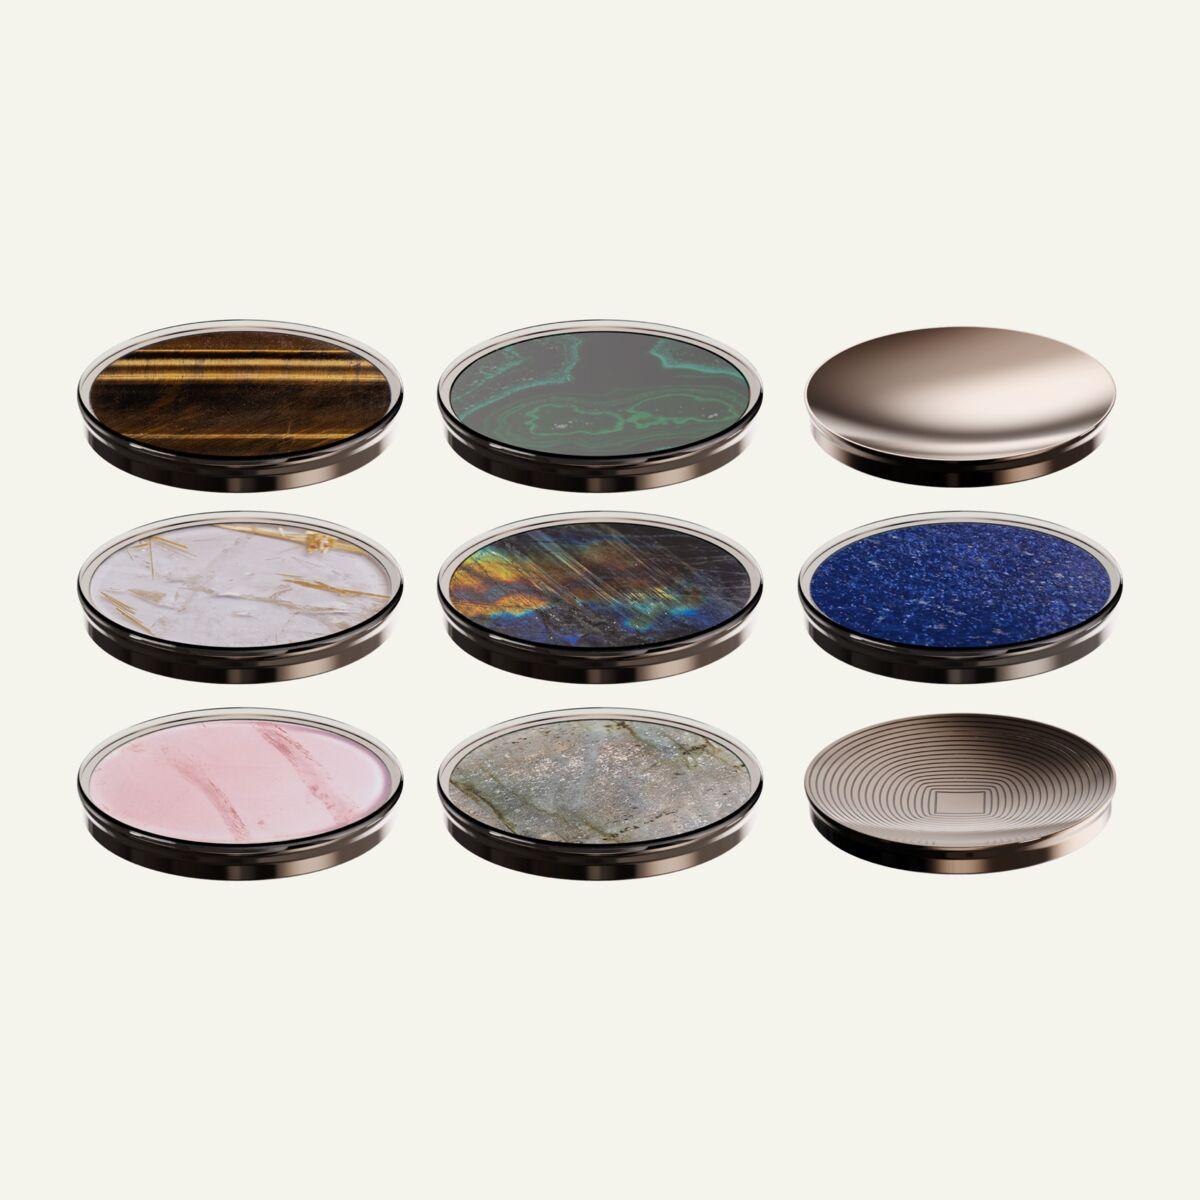 Users can choose from a range of gemstones for their screenless wearable / Nowatch